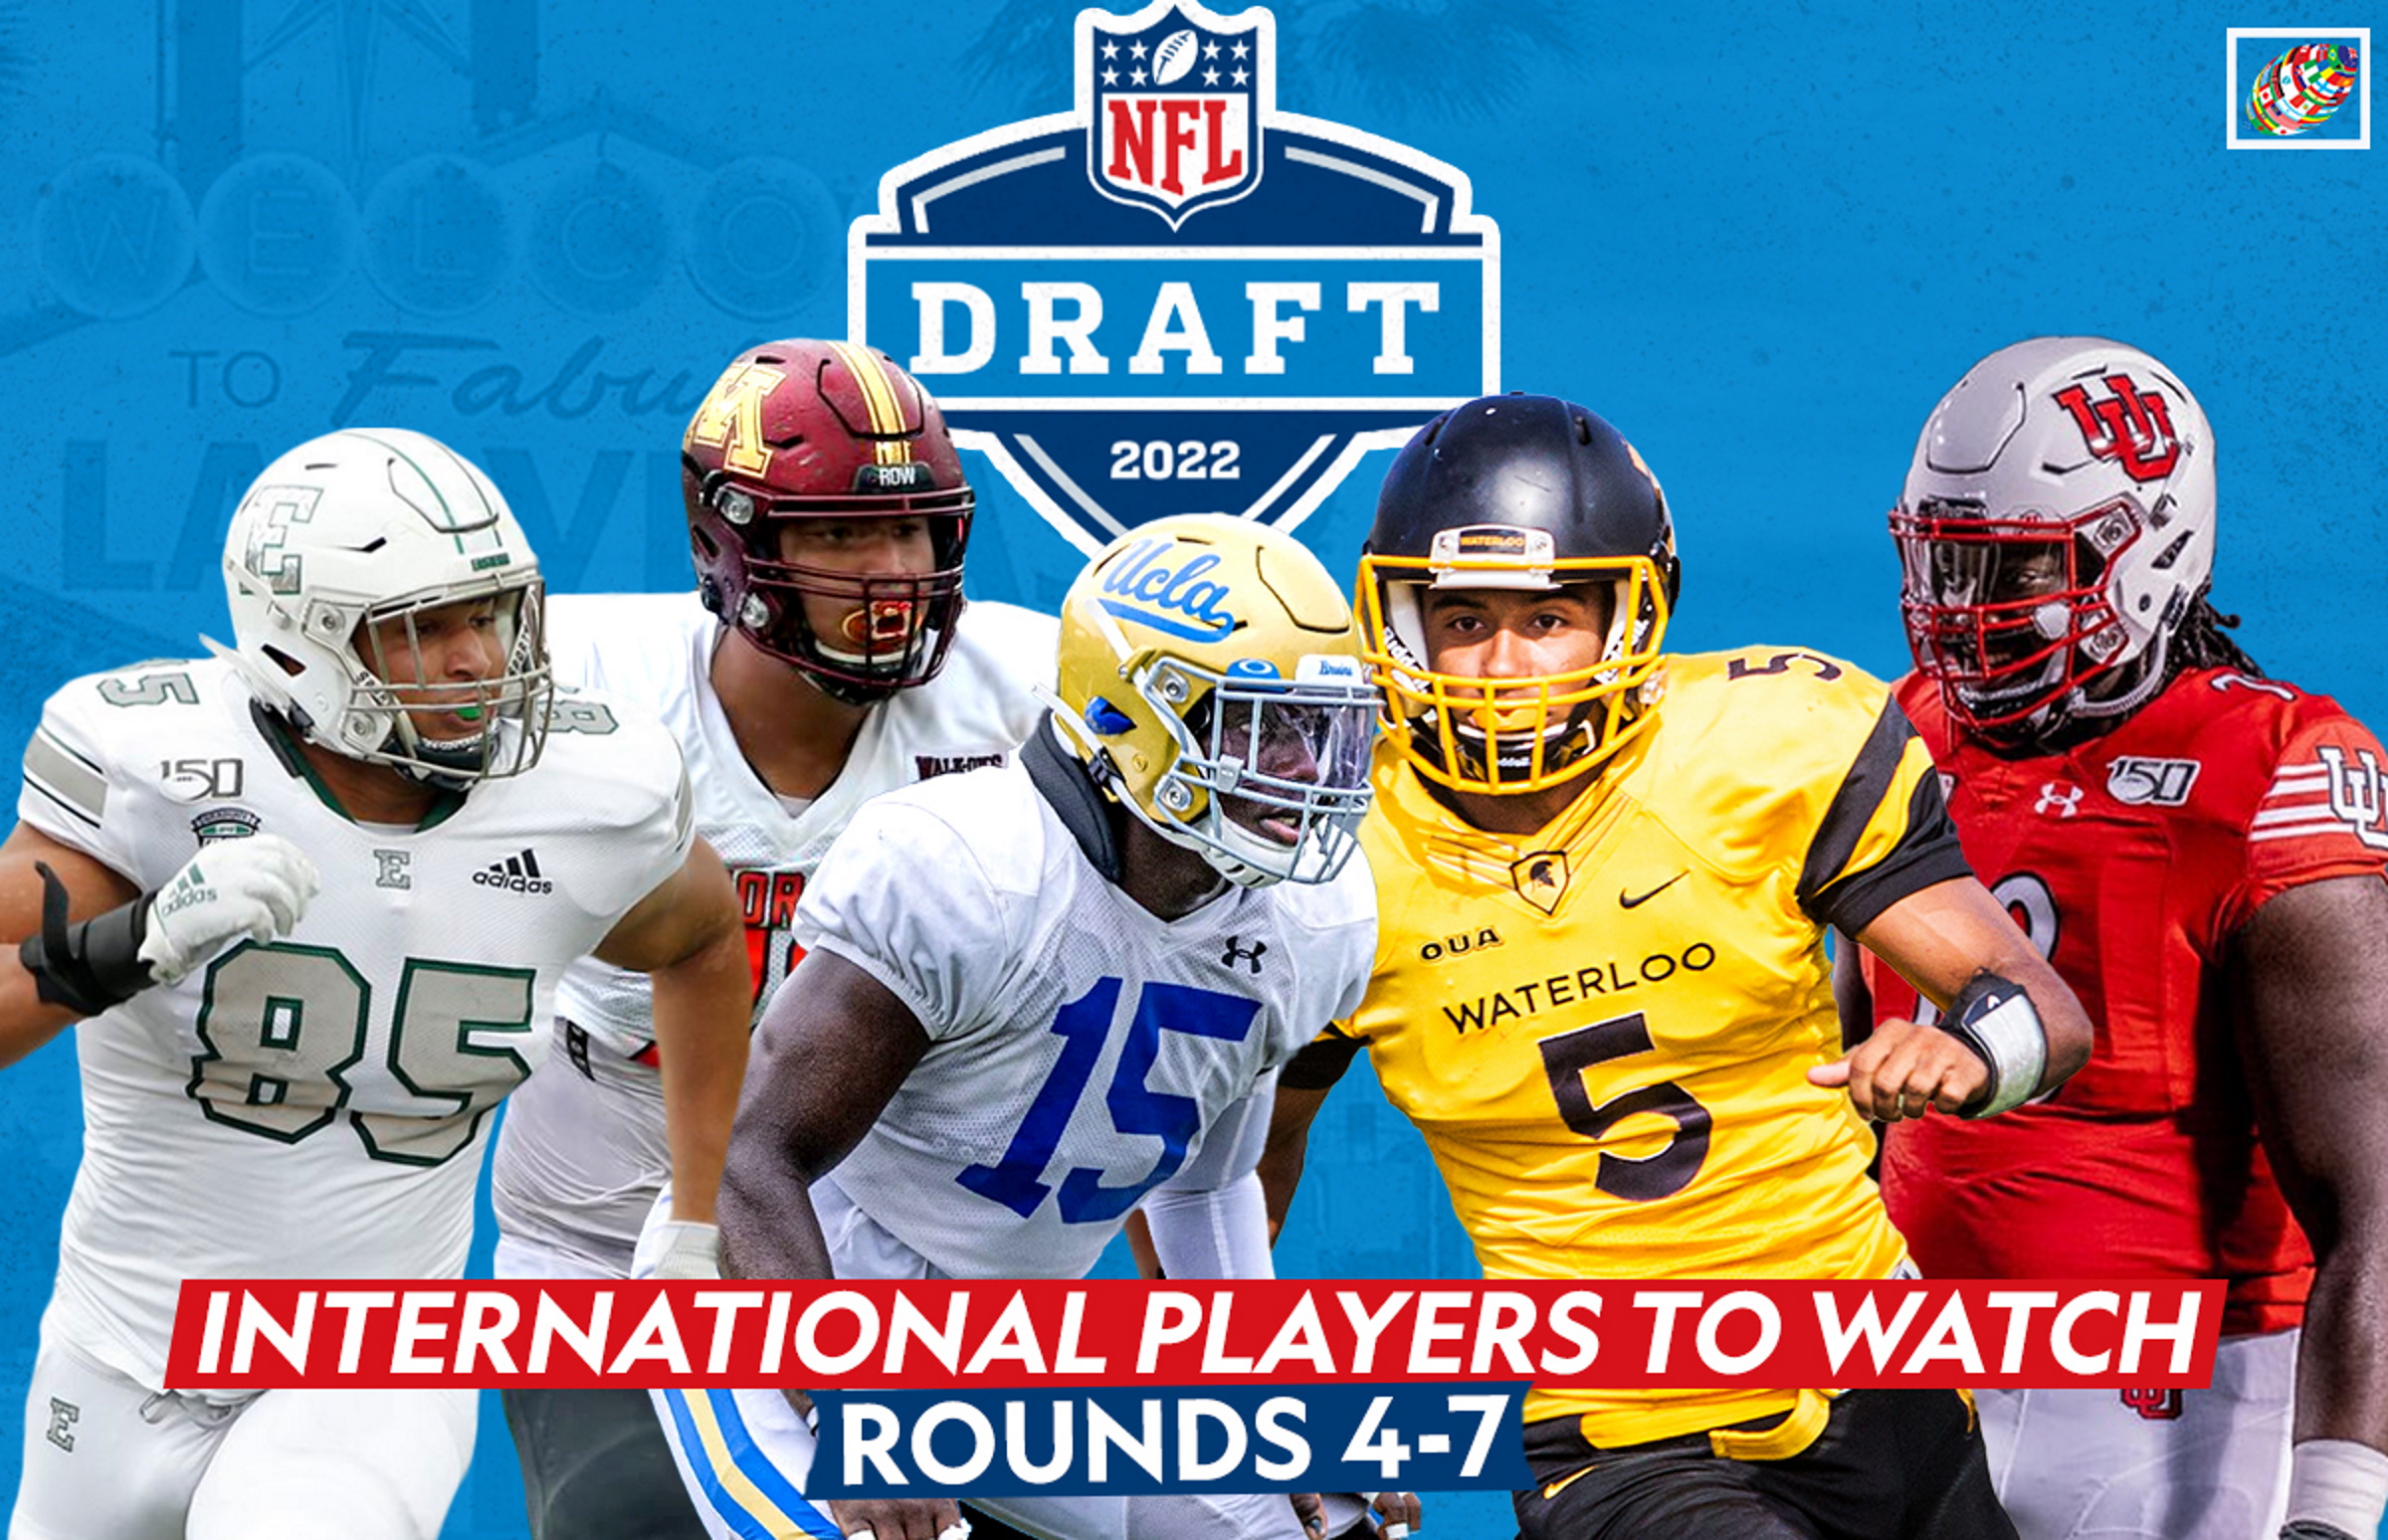 NFL Draft 2022 Day 3: International Players stay patient in the